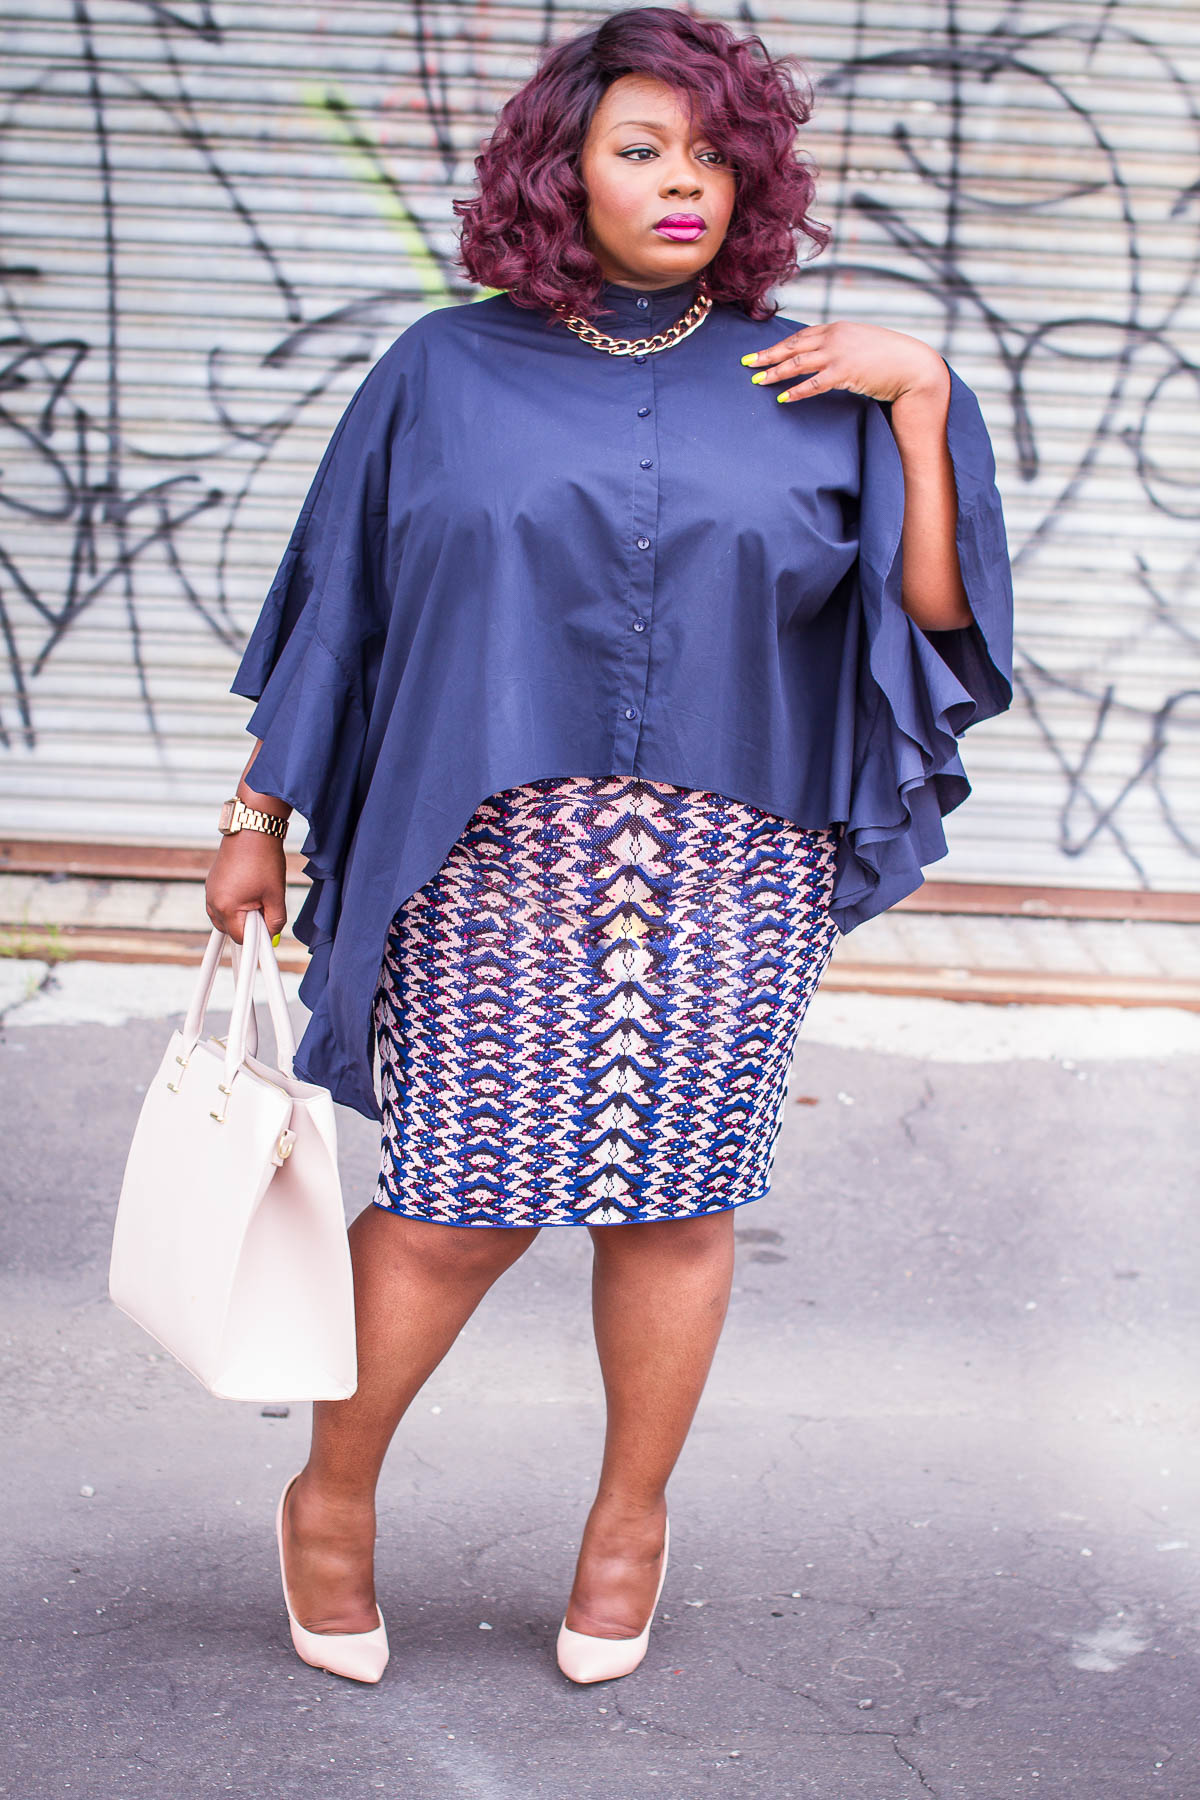 Fashion Bombshell Of The Day: Shenell from Chicago